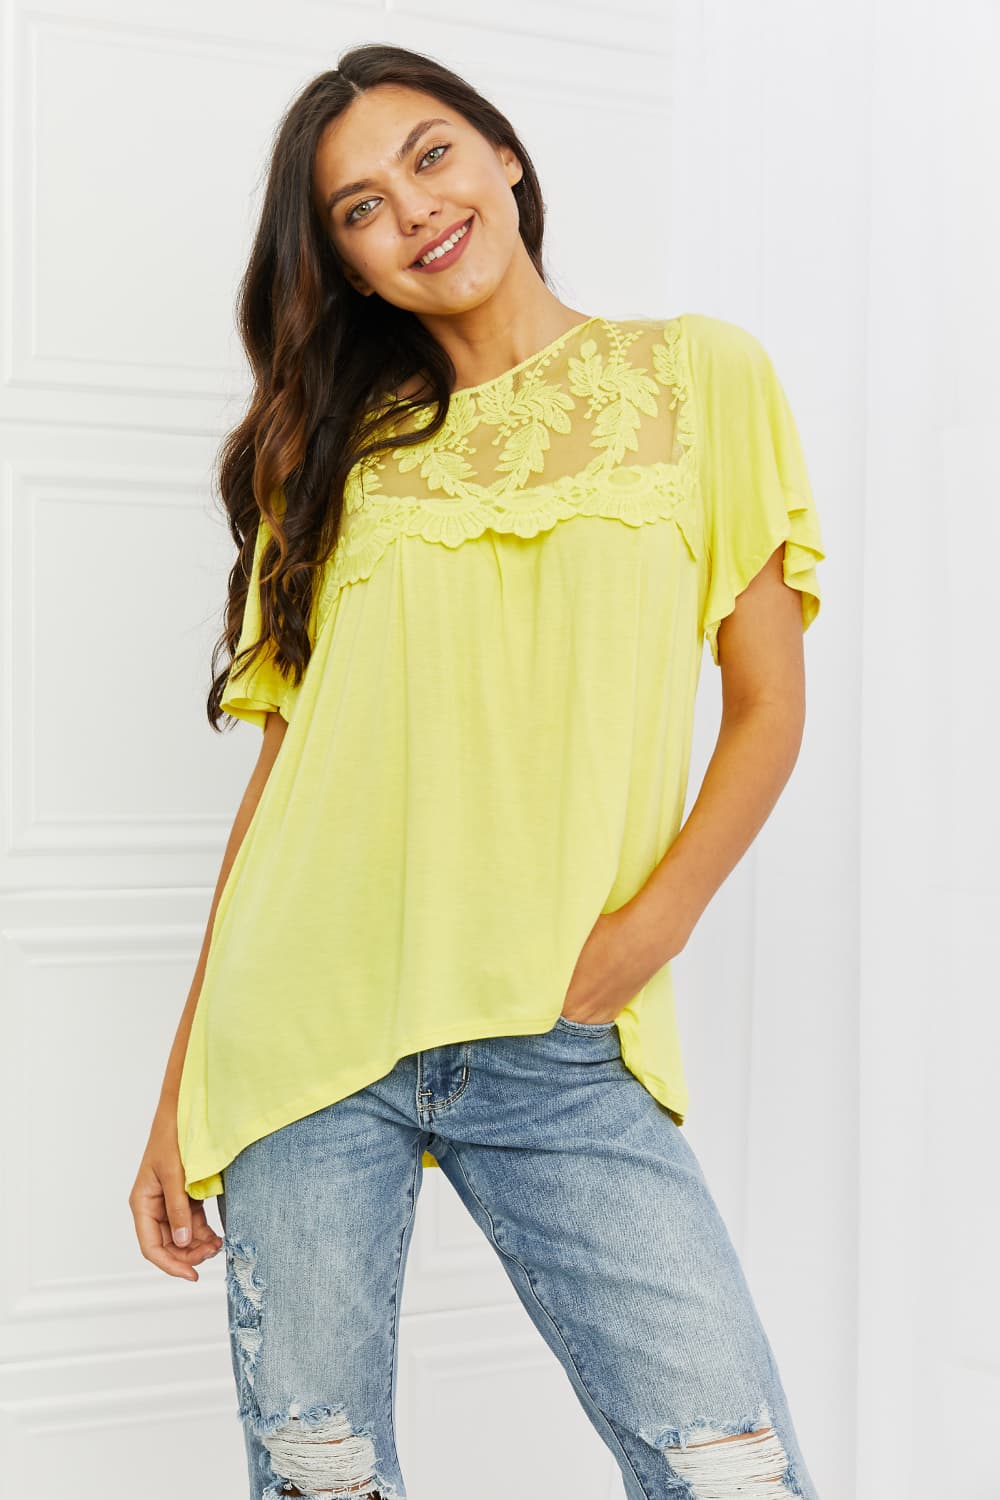 Culture Code Ready To Go Full Size Lace Embroidered Top in Yellow Mousse - The Fashion Unicorn